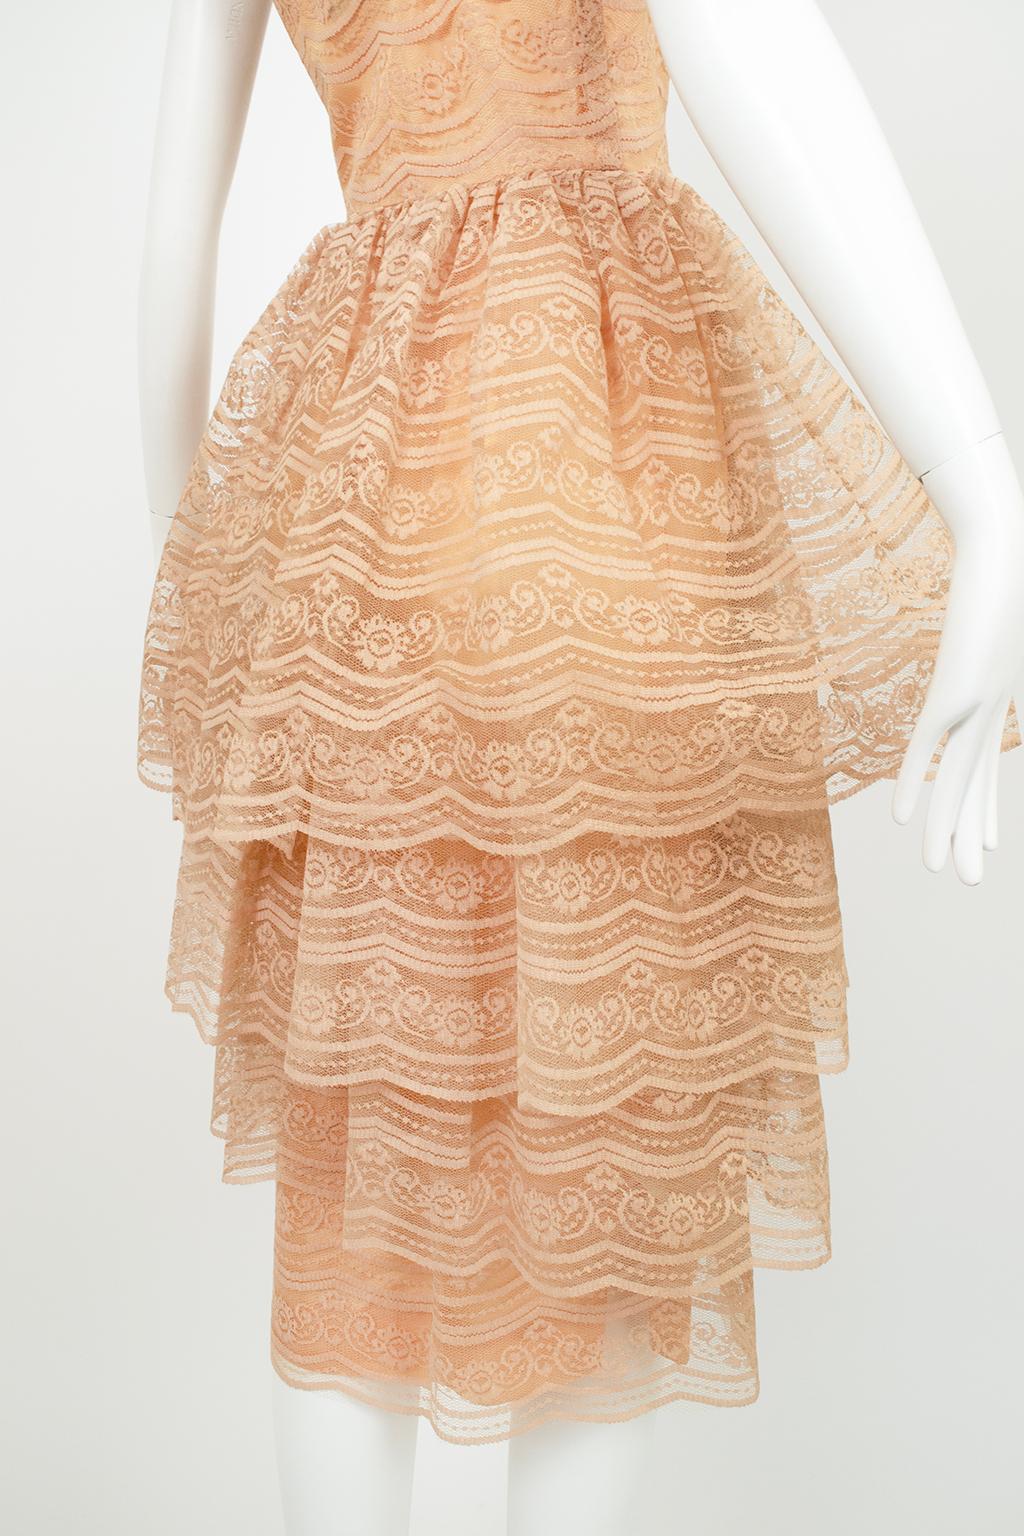 Nude Lace Lampshade Funnel Skirt Cocktail Party Dress – XS, 1960s For Sale 5